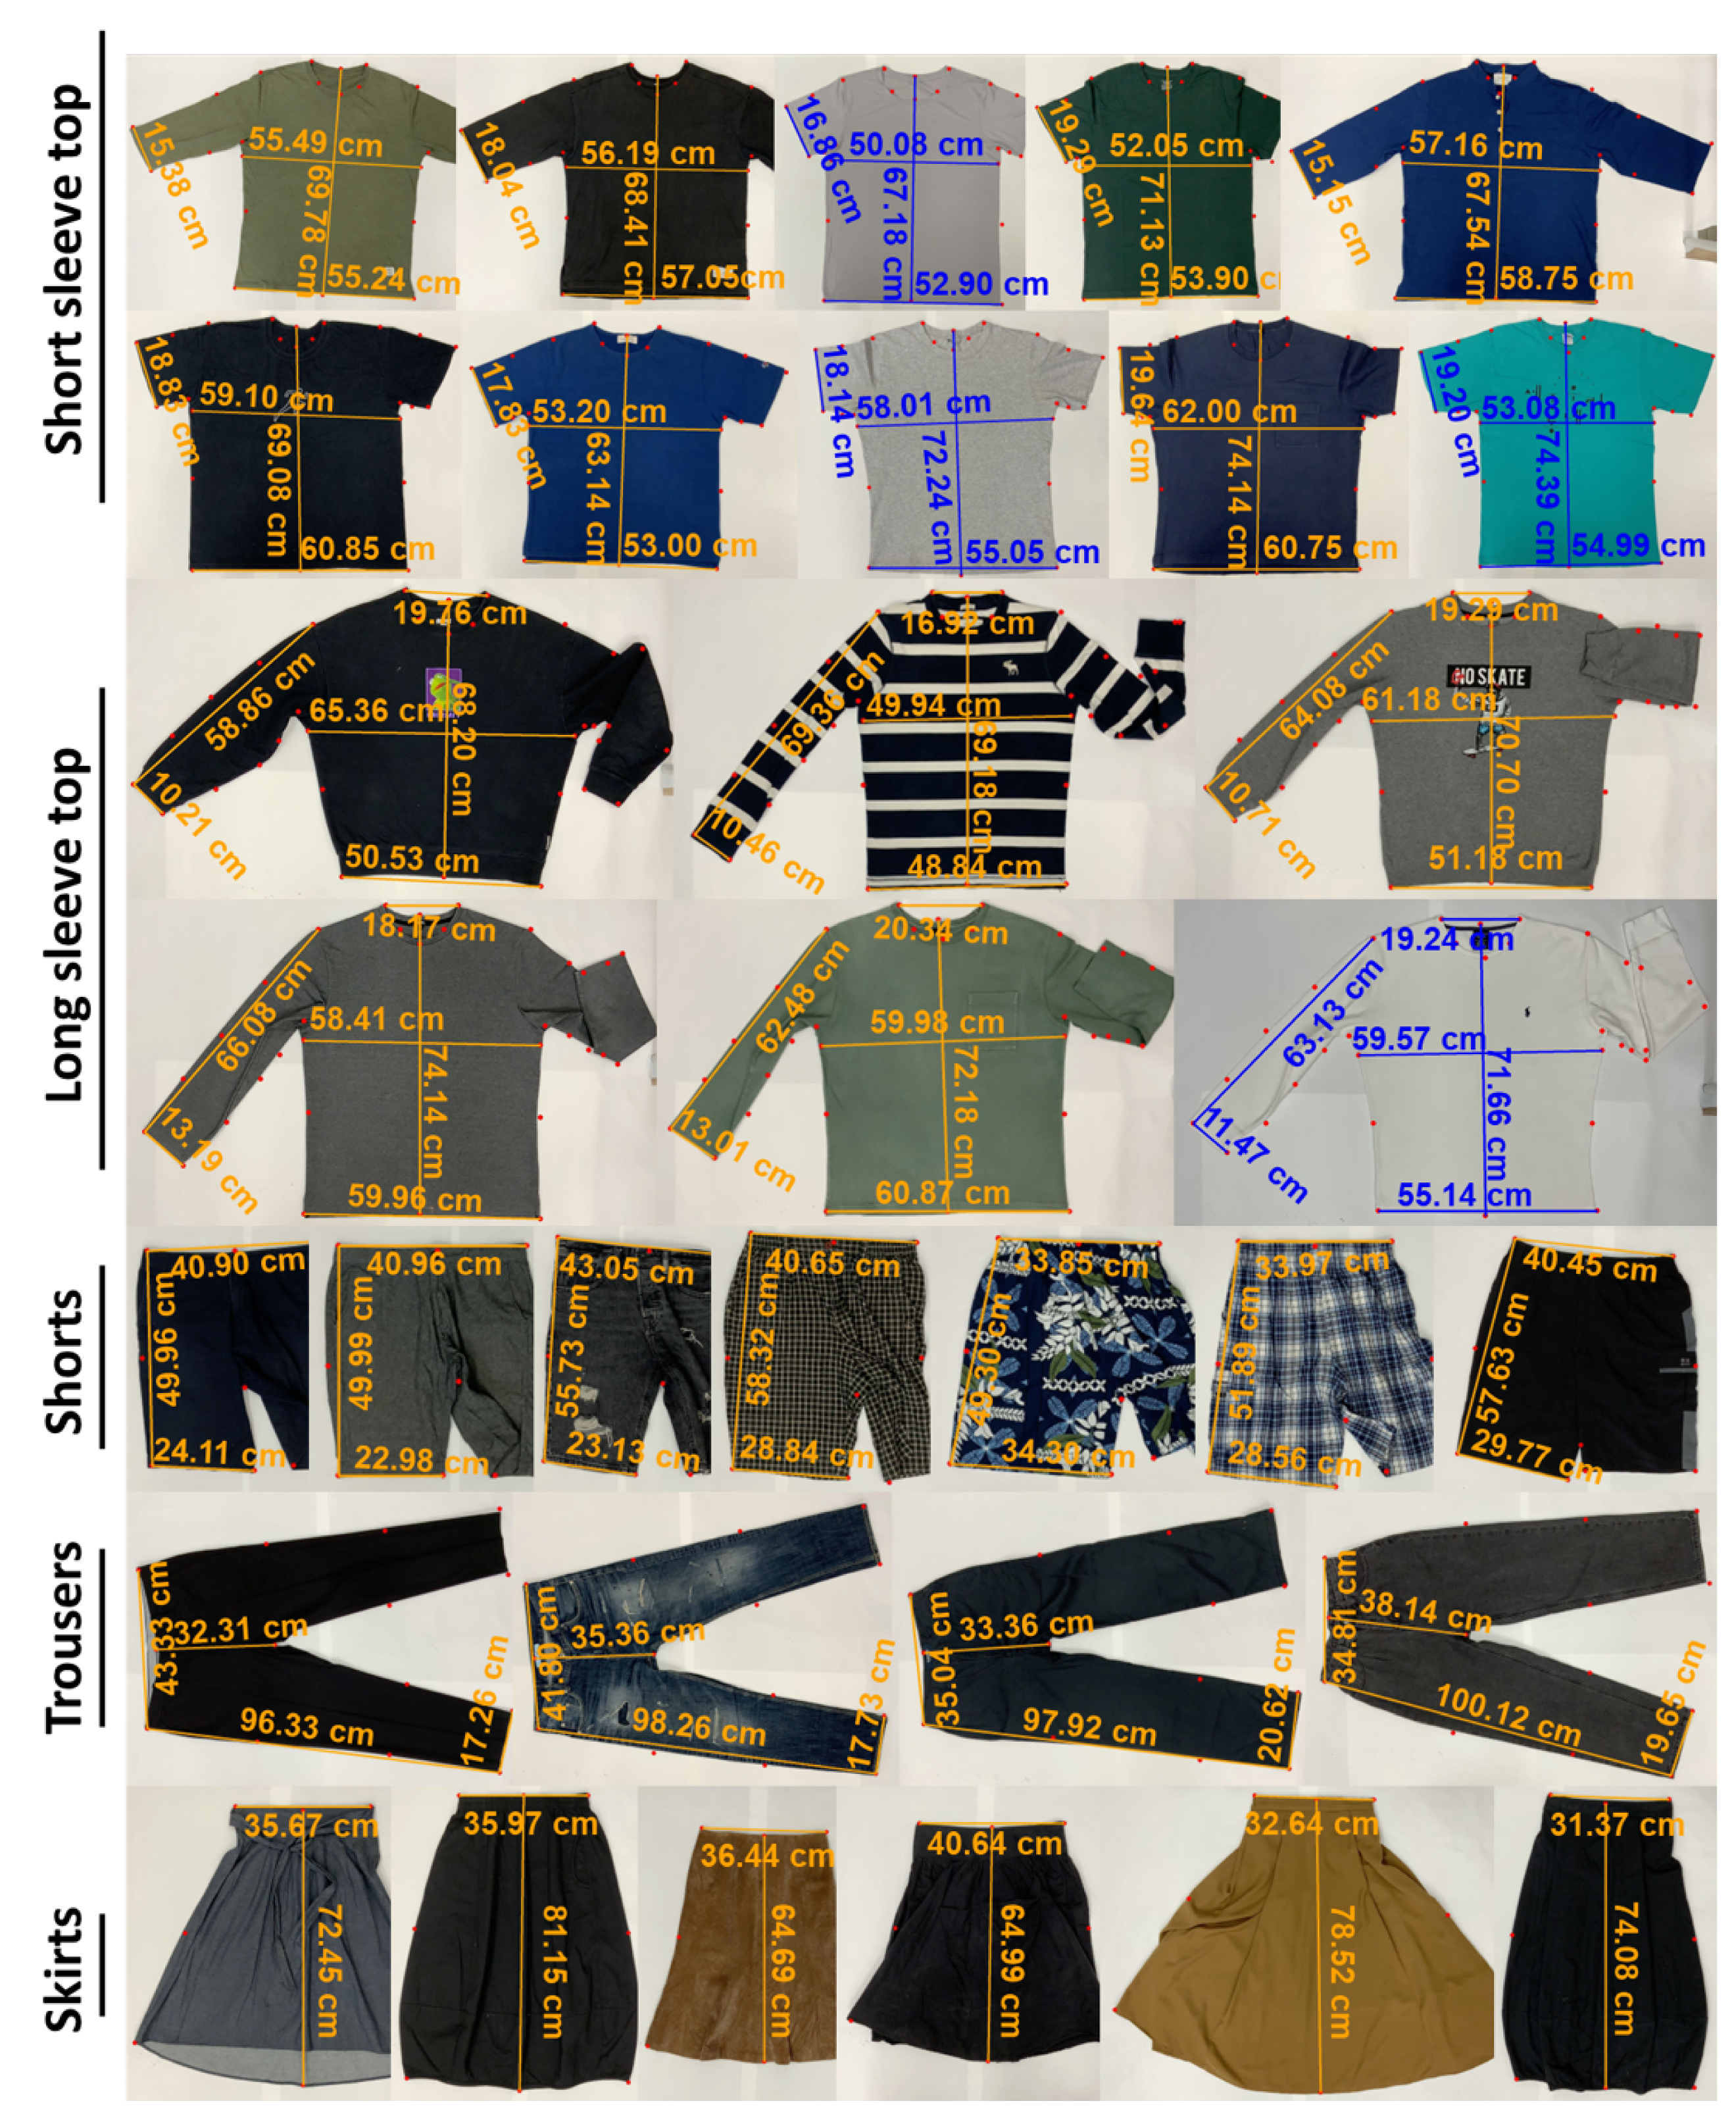 Models Computer Automatic Measurements Vision of Free Point Data Full-Text Applied Deep Cloud Learning Sciences | Garment Using and | Sizes